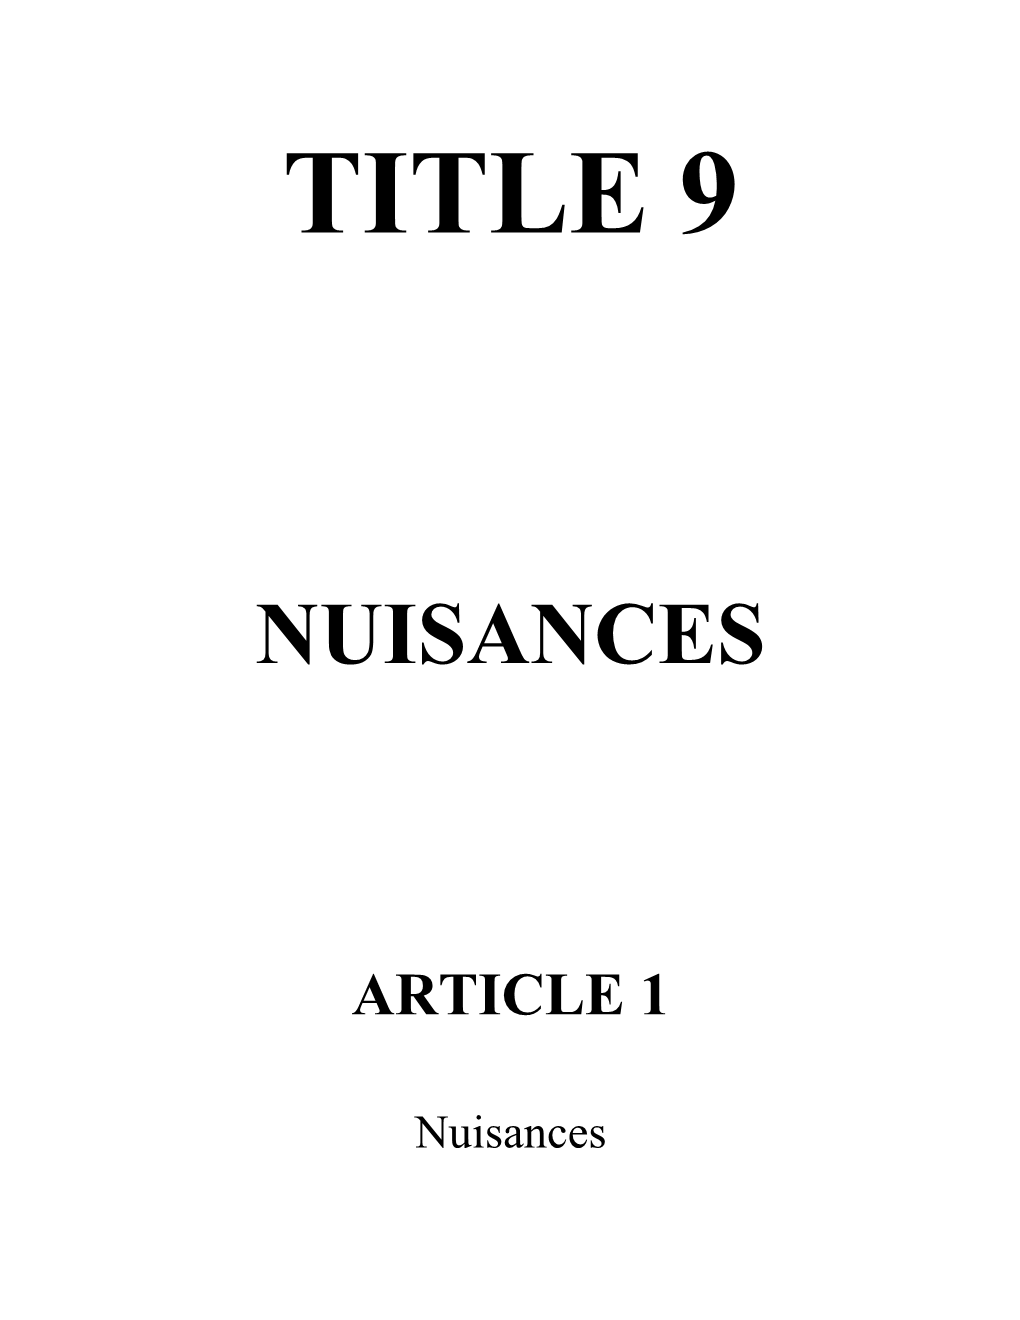 Title 9 Article 1